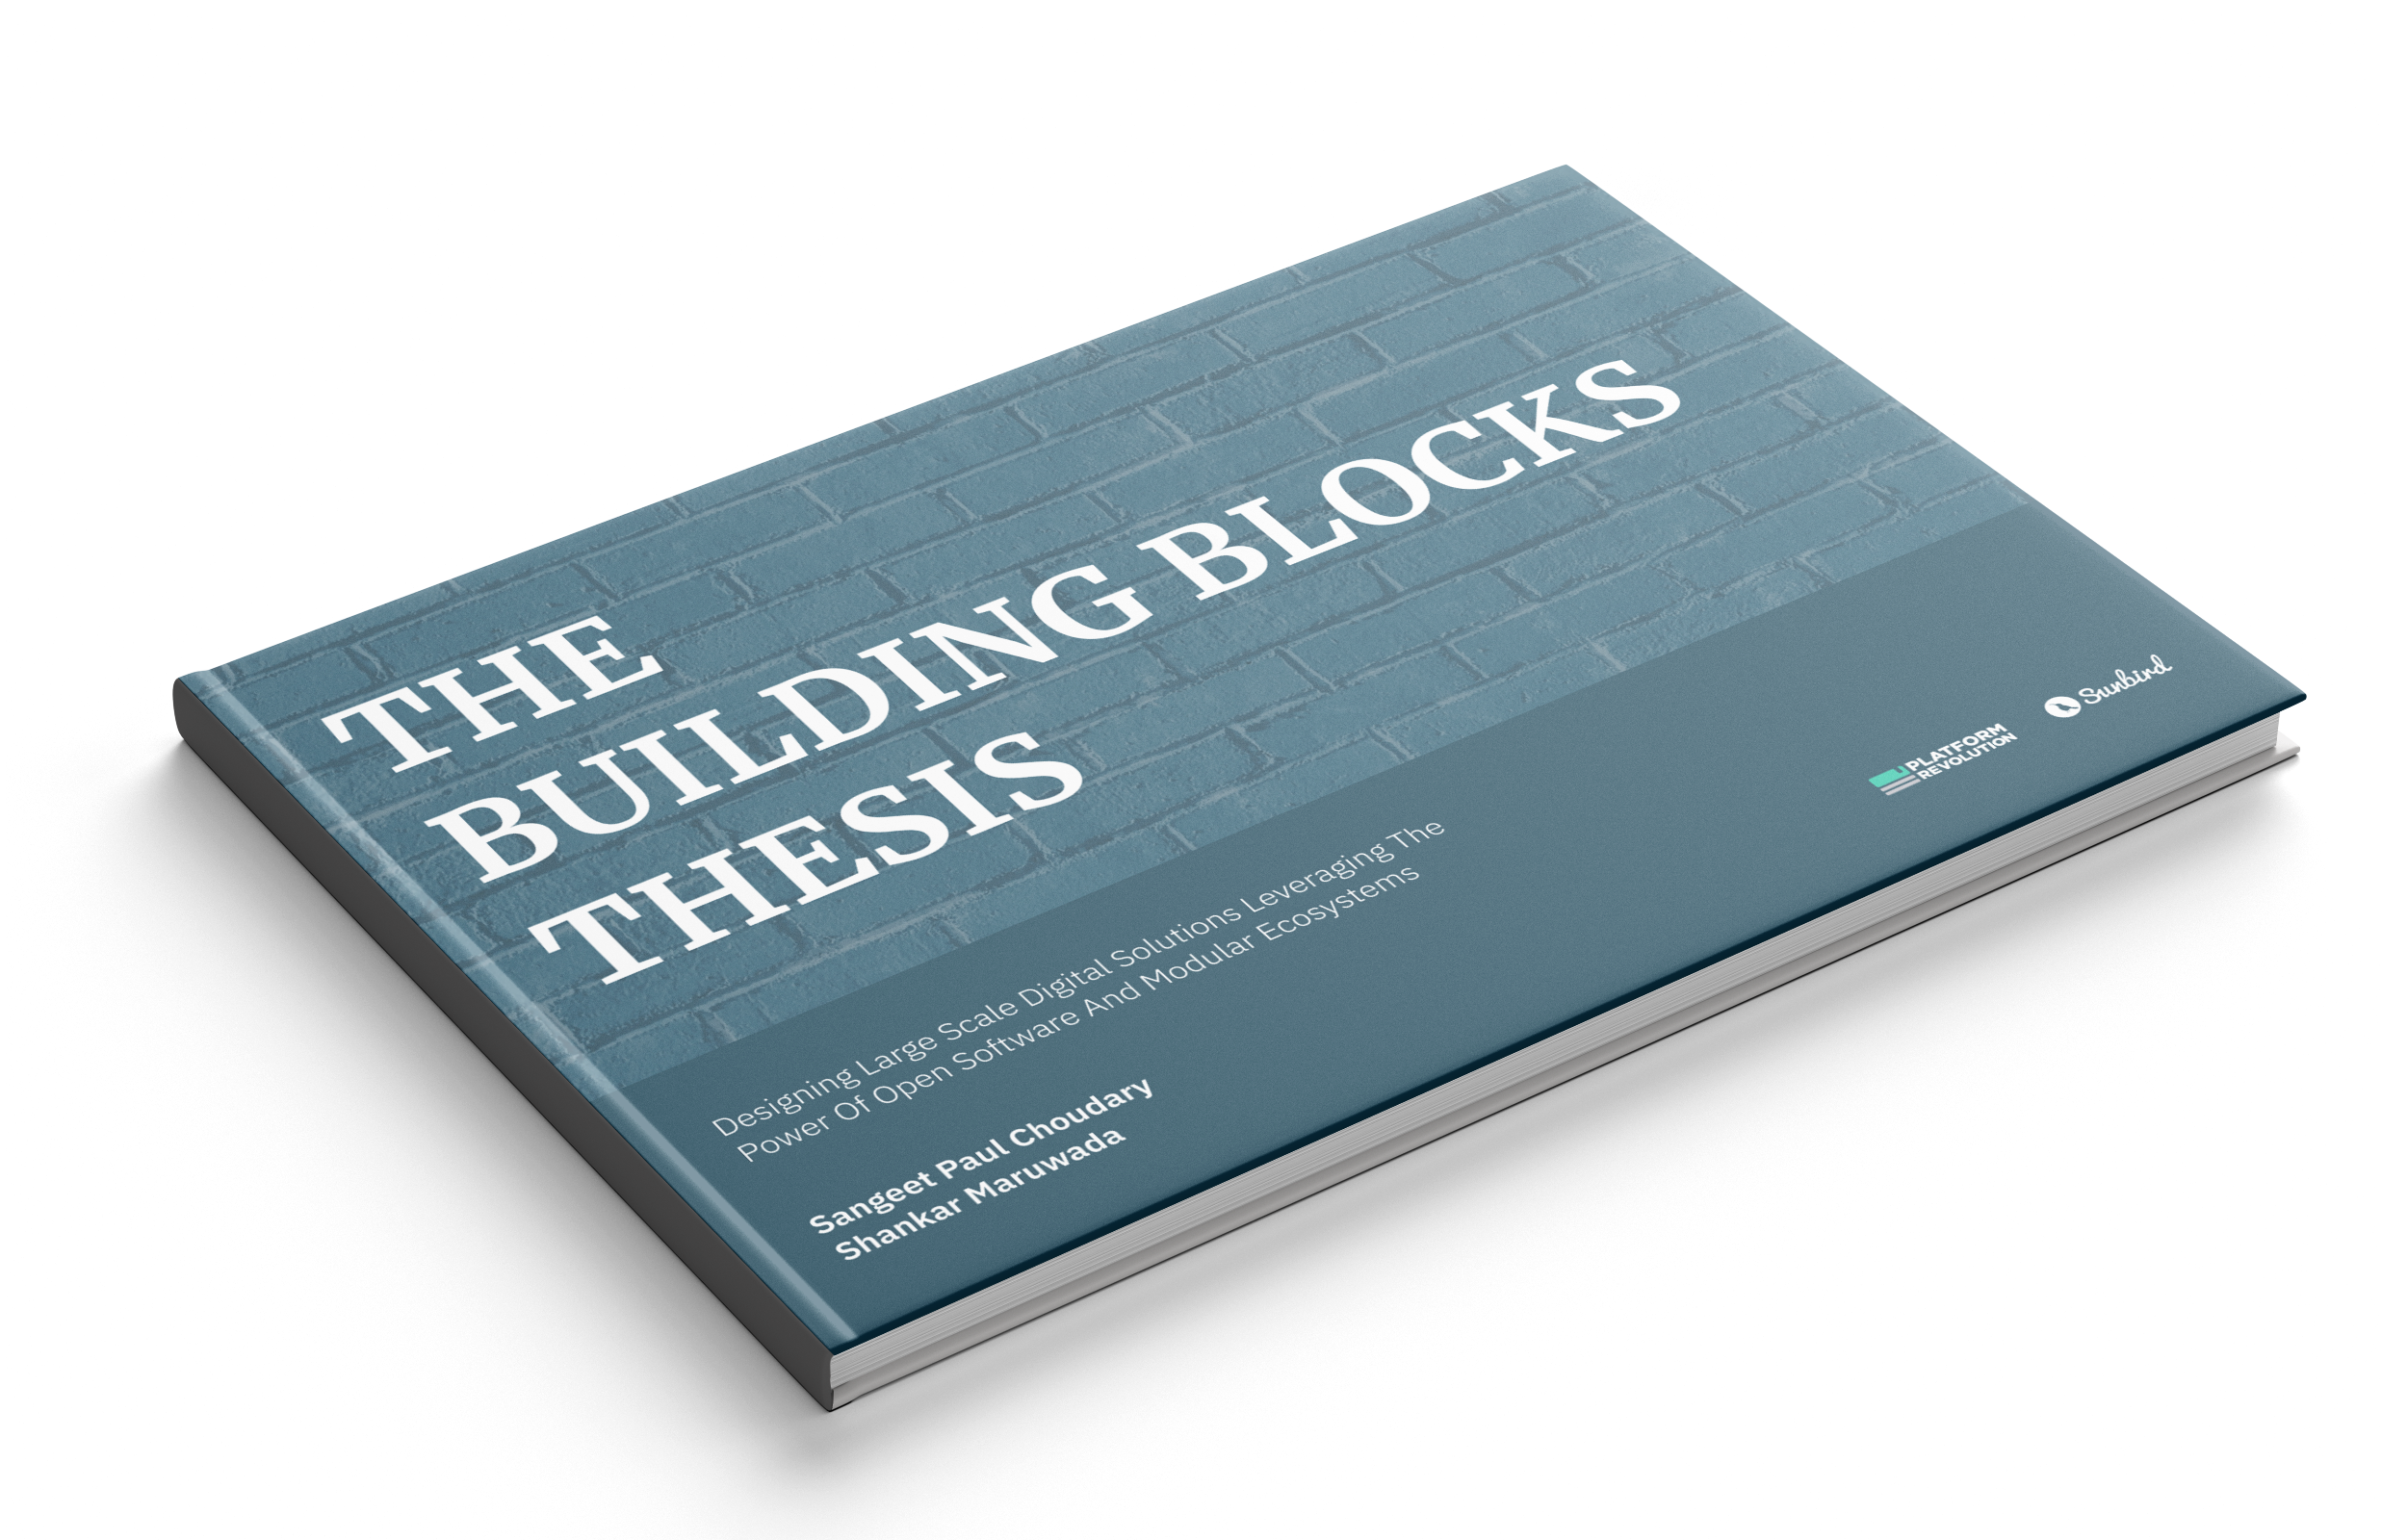 <strong>The Building Blocks </strong><span>Thesis</span>